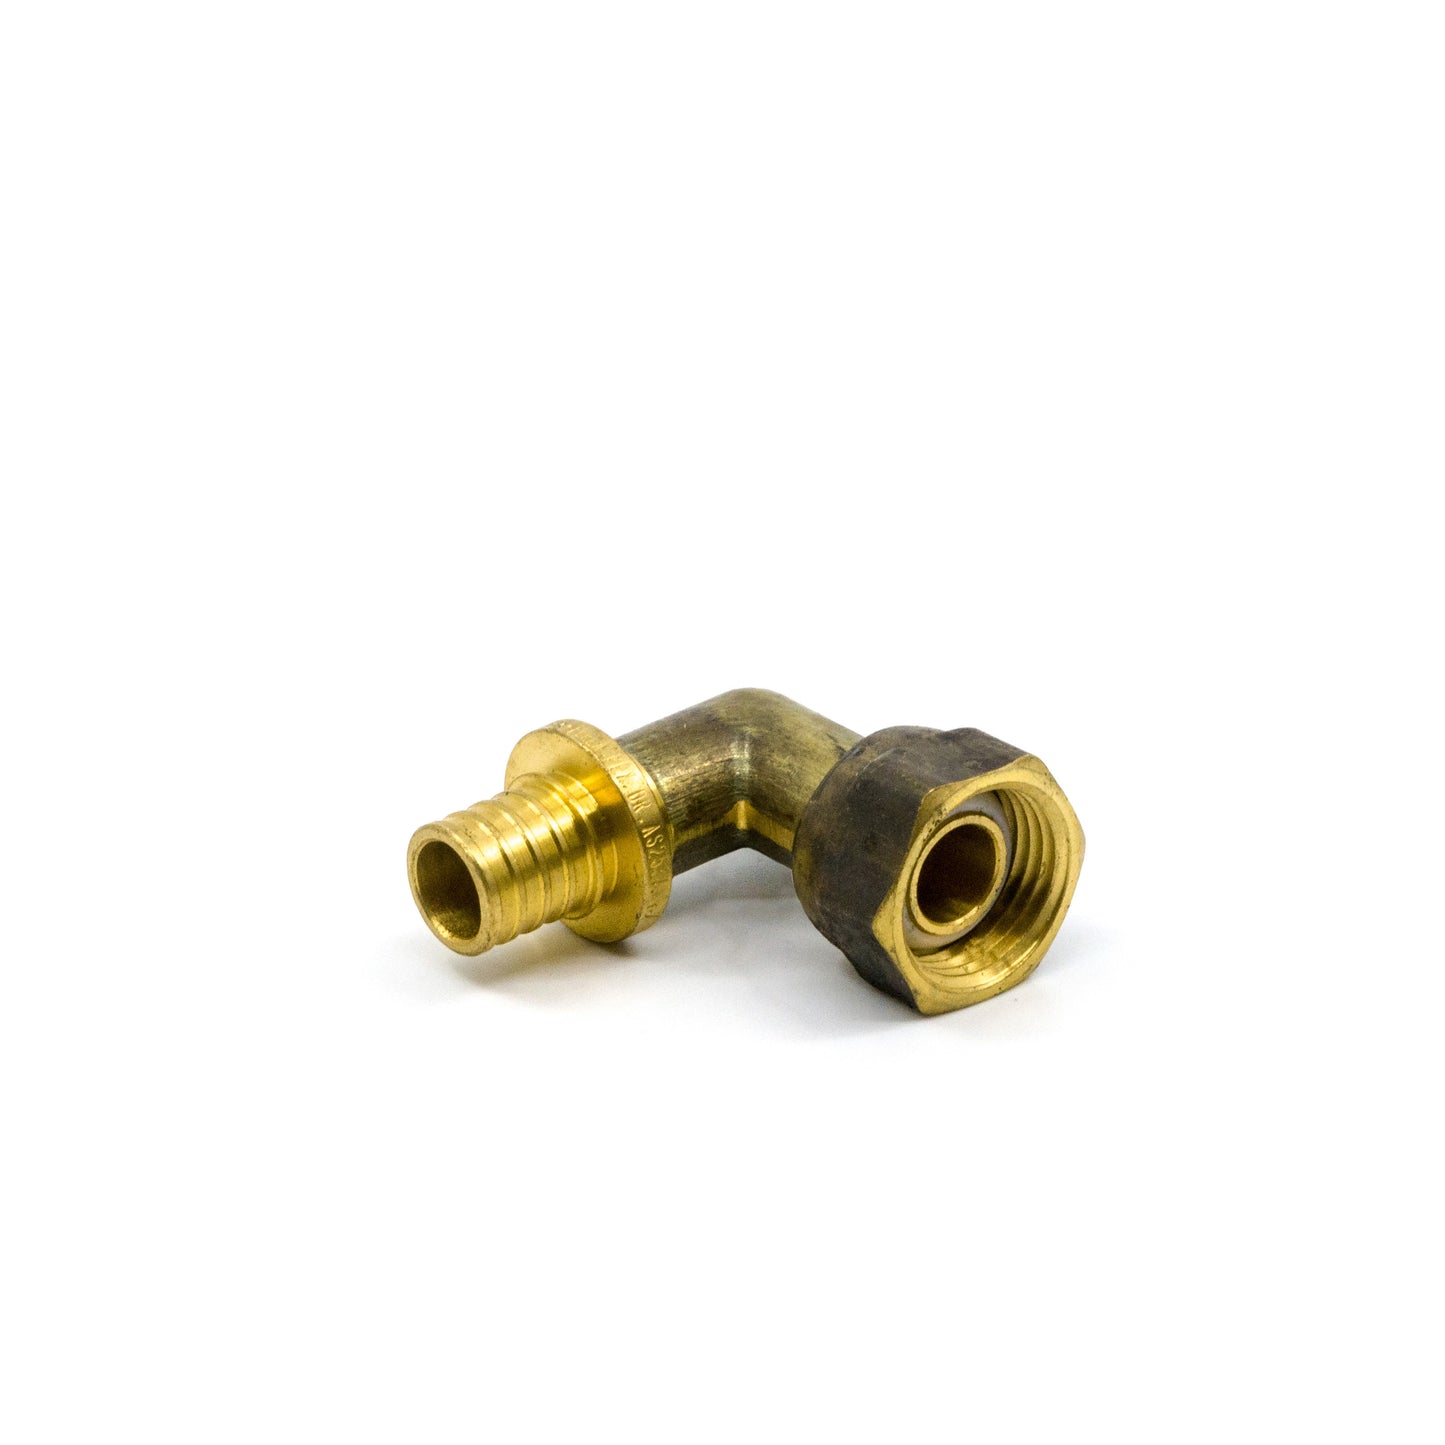 Forza Pex Female Bent Tap Connector 16mm